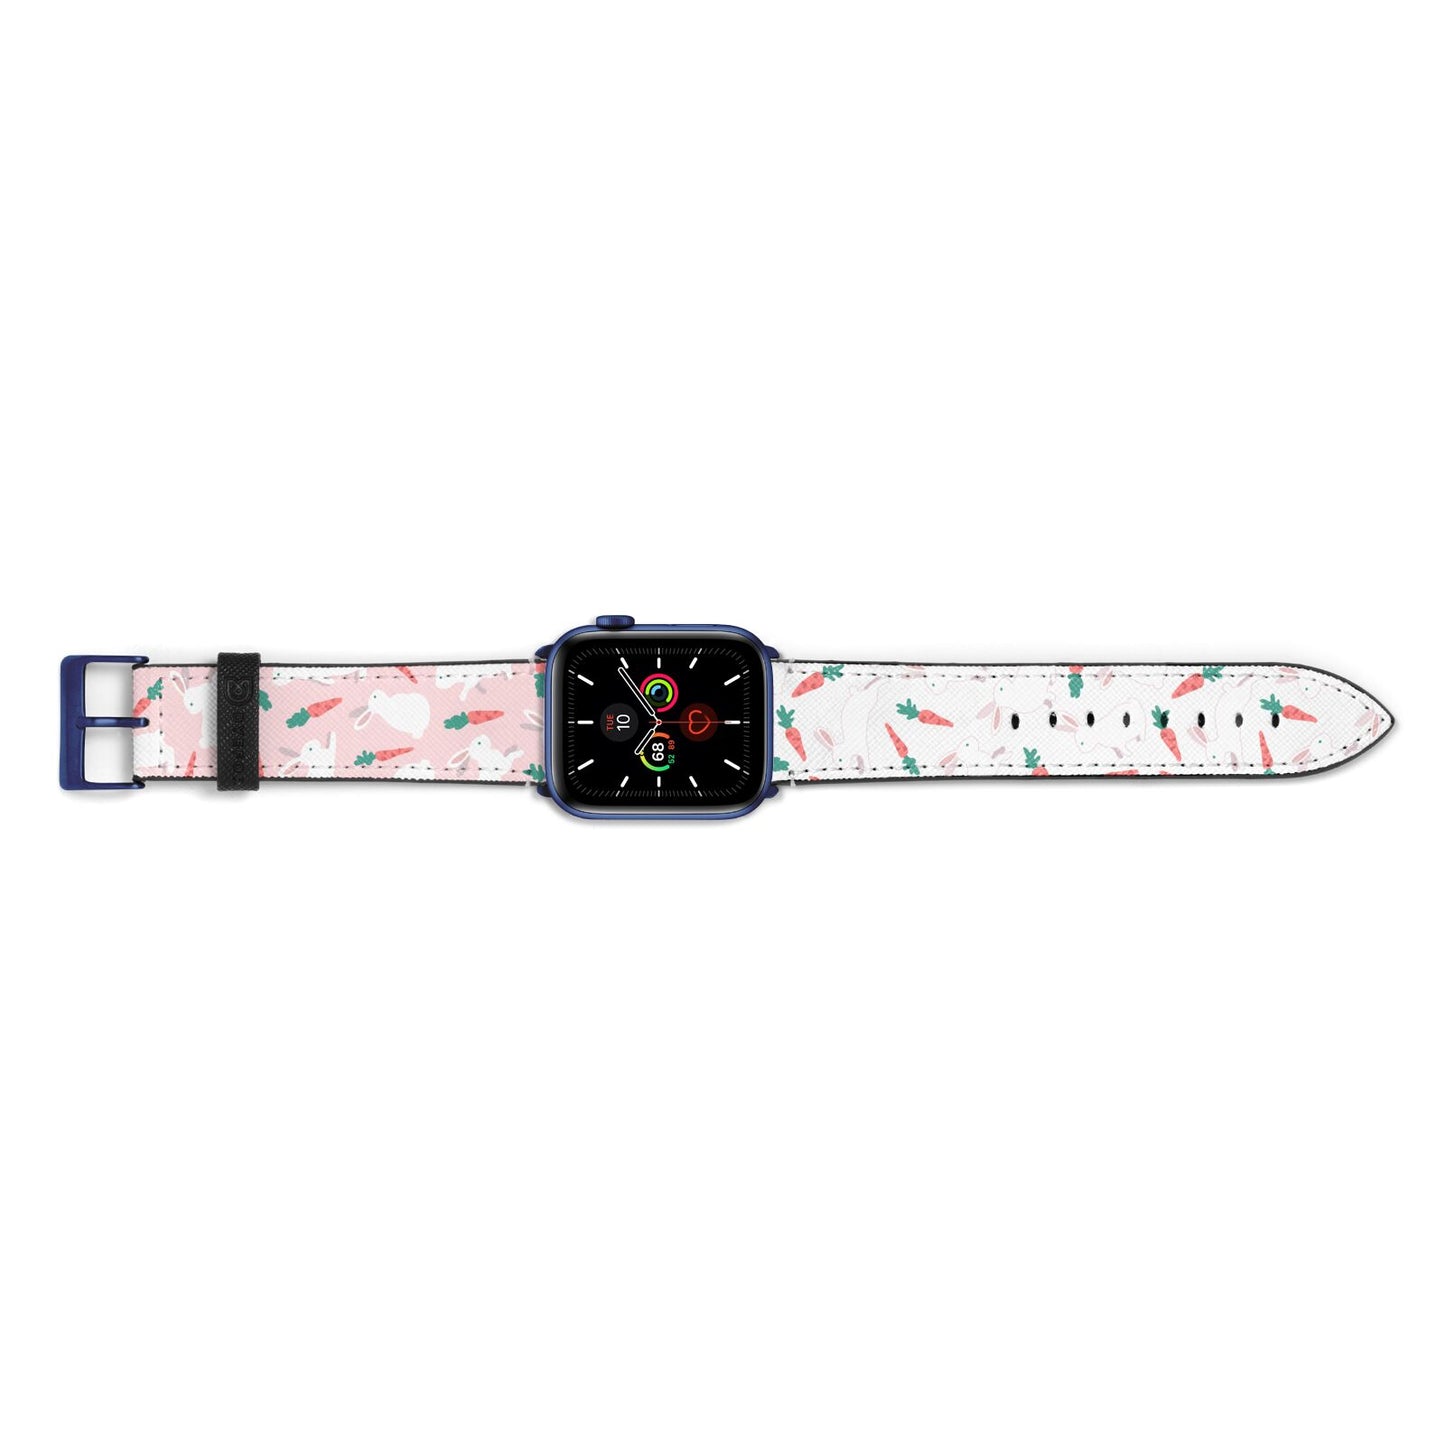 Easter Bunny And Carrot Apple Watch Strap Landscape Image Blue Hardware